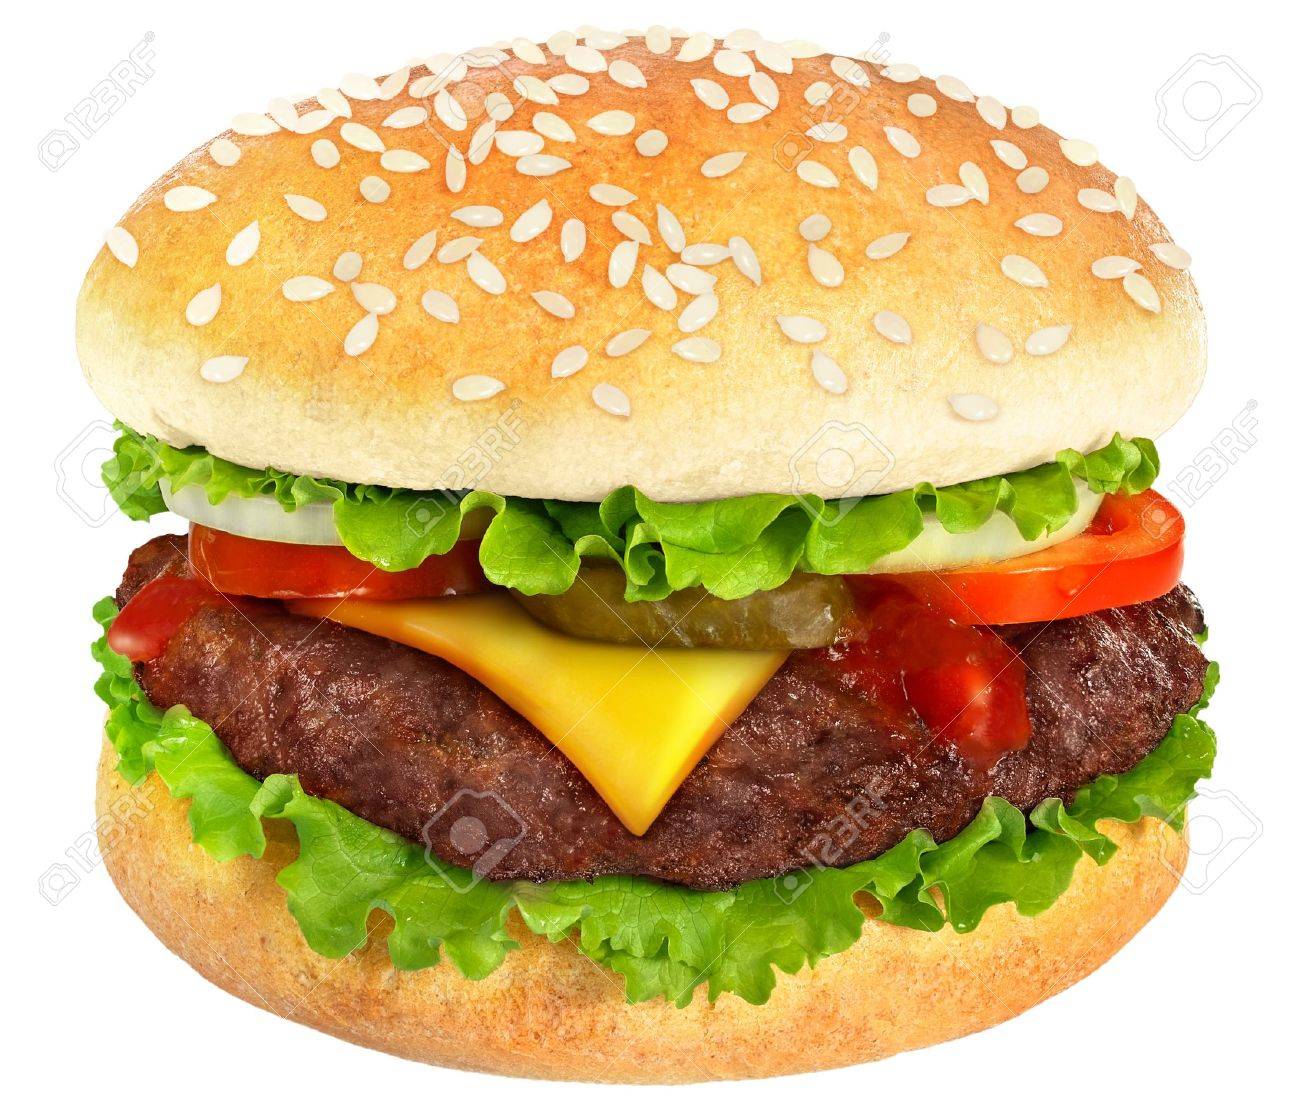 Cheeseburger Isolated On White Background Stock Photo Picture And